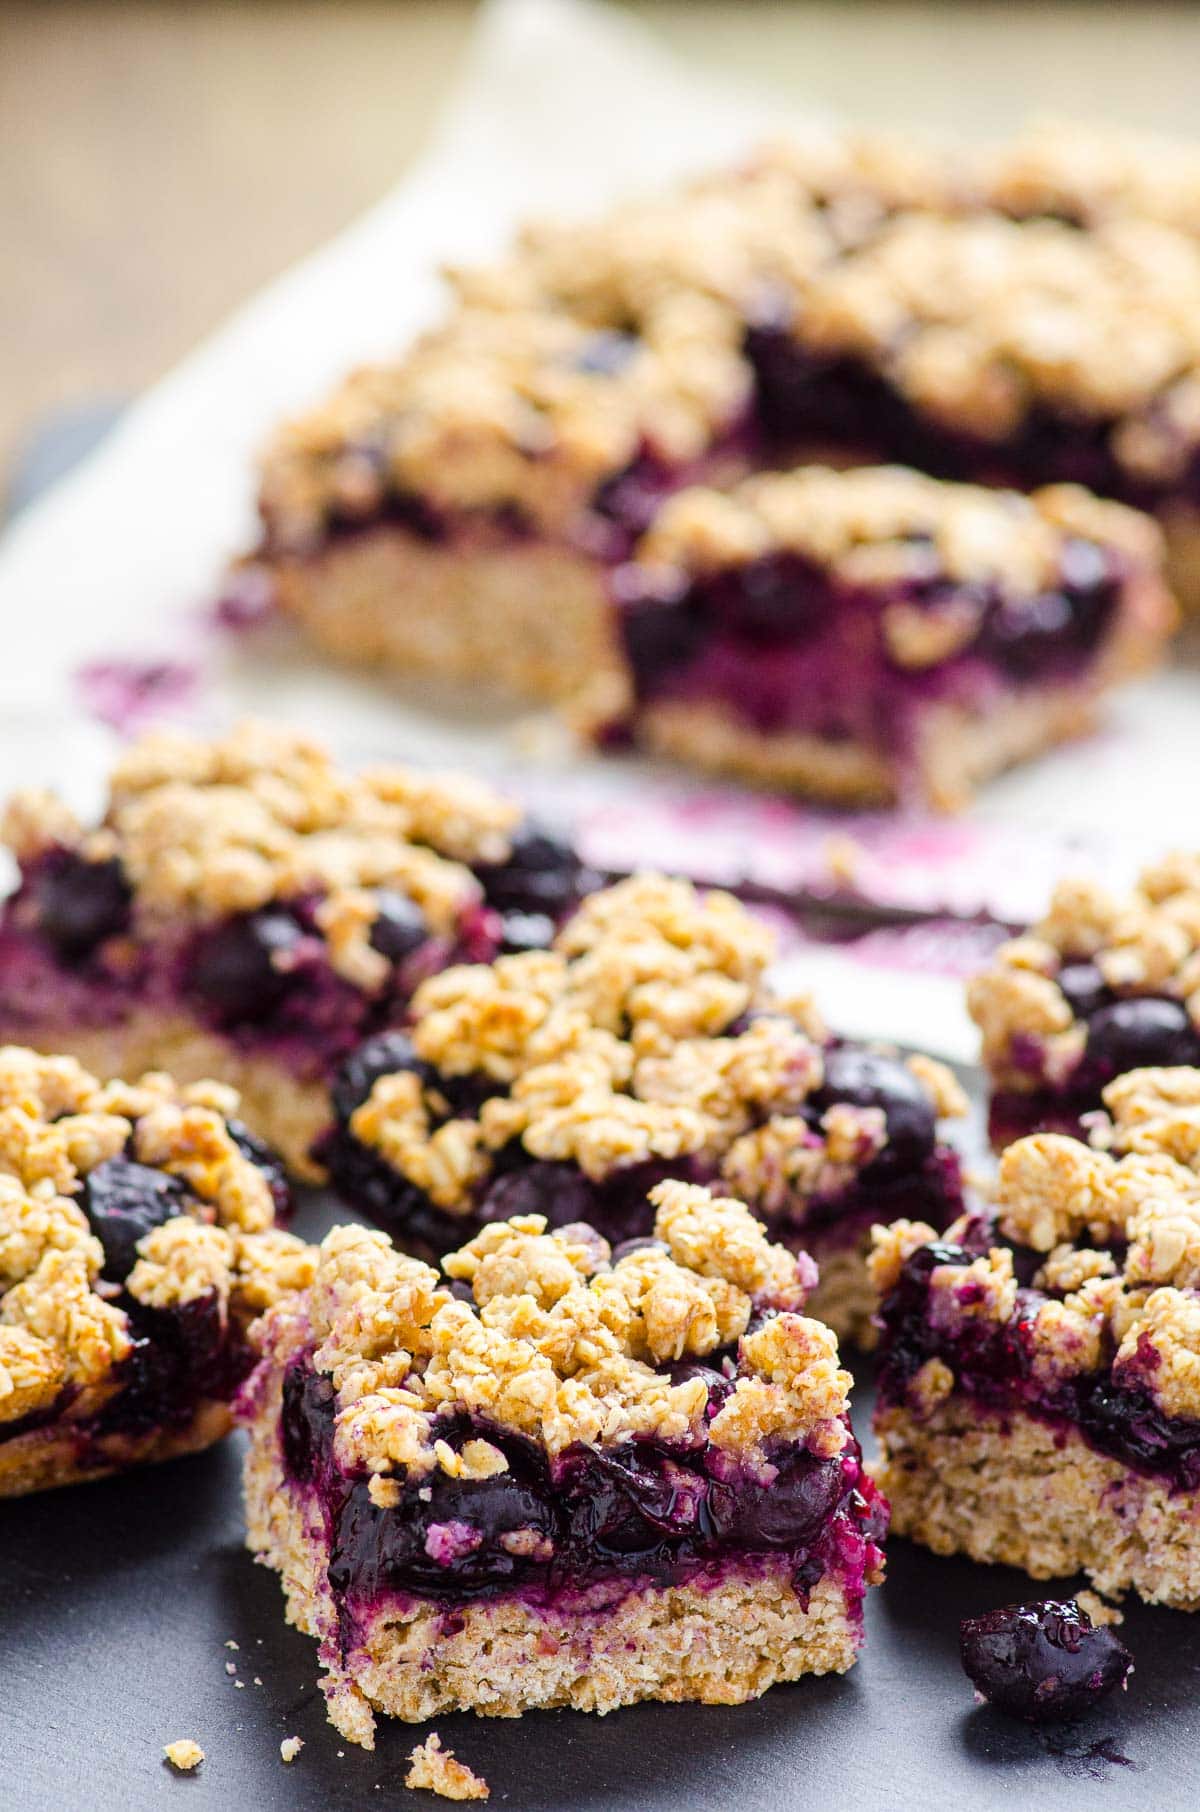 Blueberry oatmeal bars cut into squares and served on black platter.